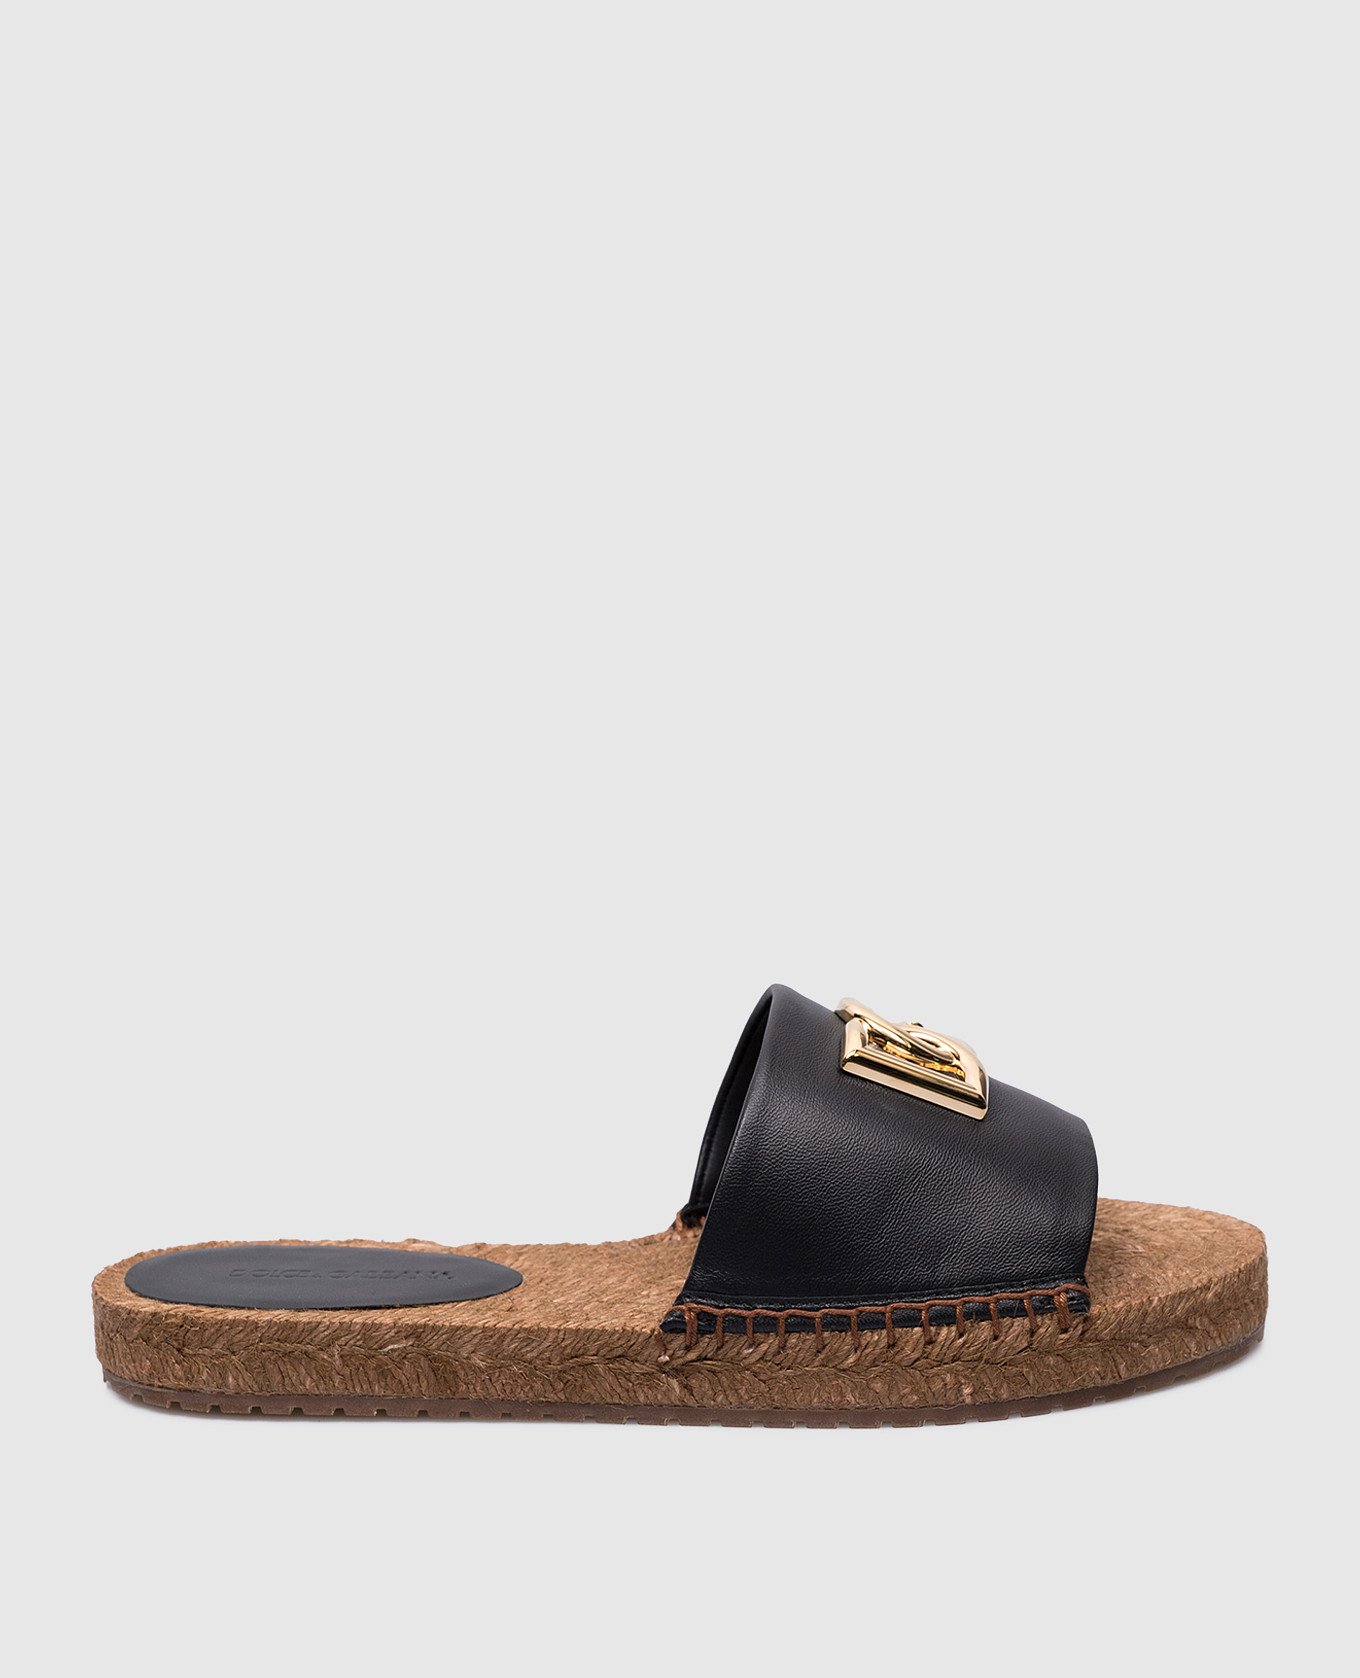 Black leather espadrilles with logo